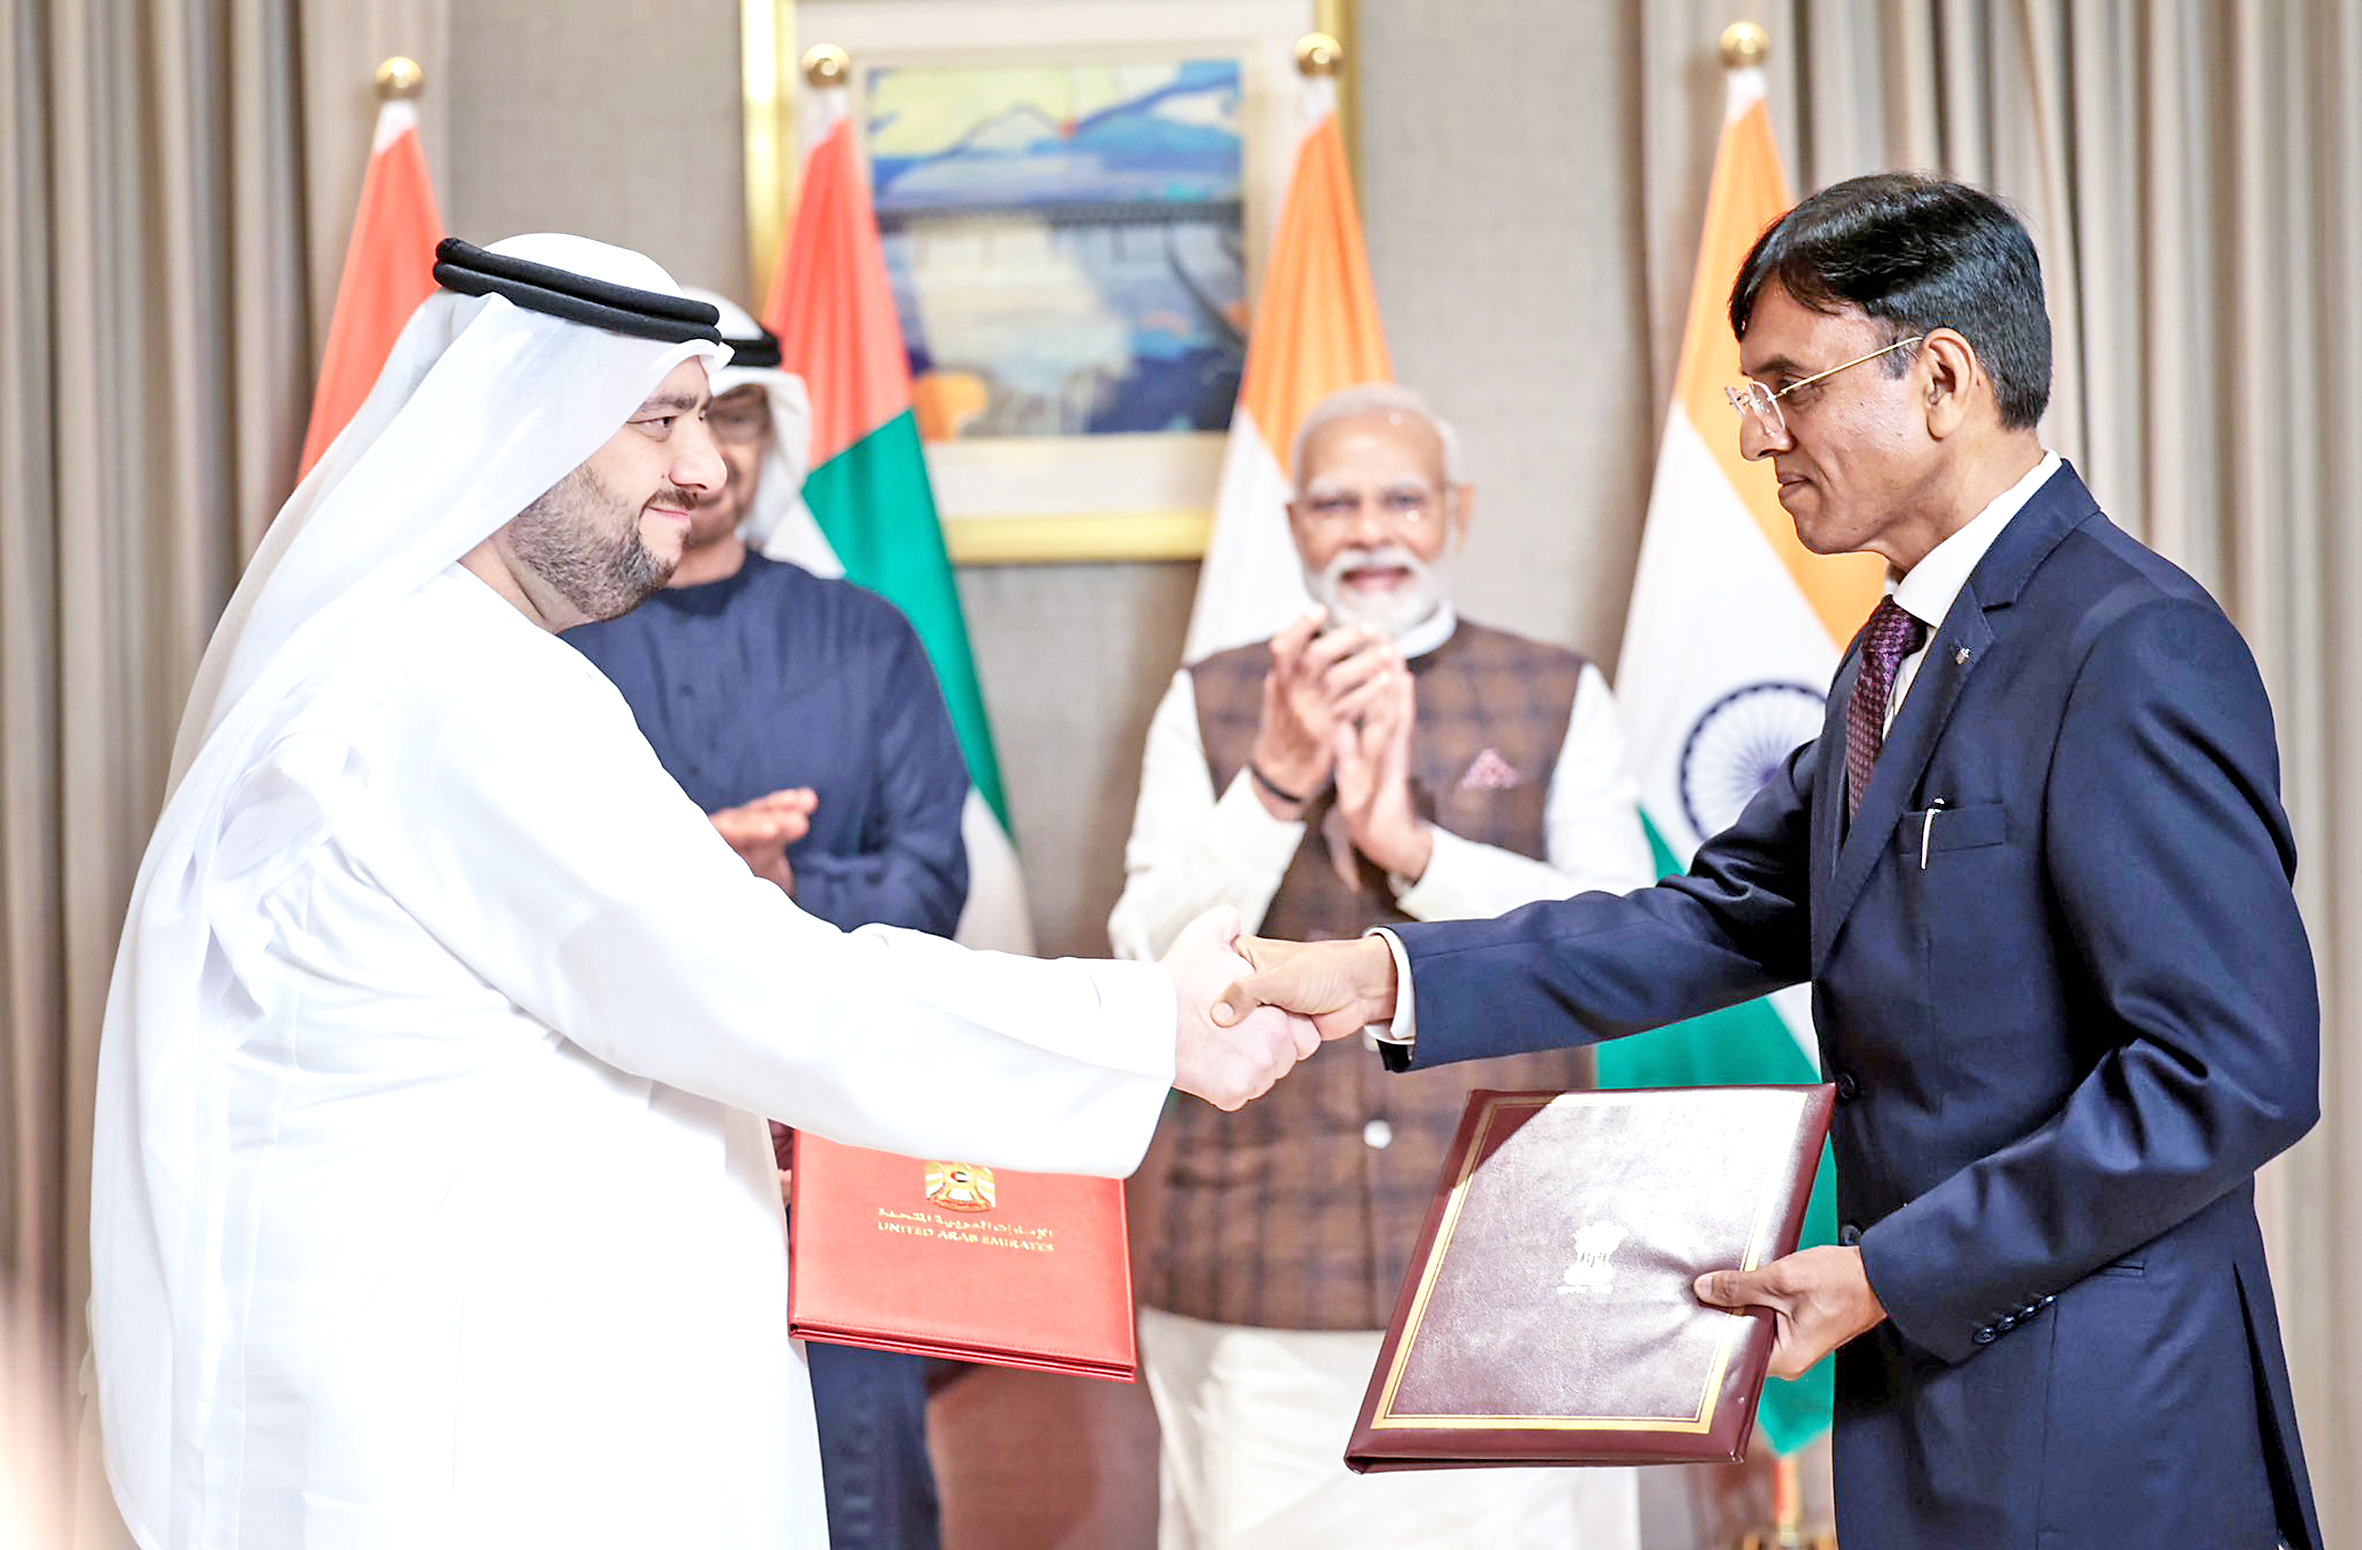 UAE President Mohamed bin Zayed Al Nahyan and PM Narendra Modi witness MoU exchange ceremony between India and UAE on the field of health by Union Health Minister Mansukh Mandaviya.